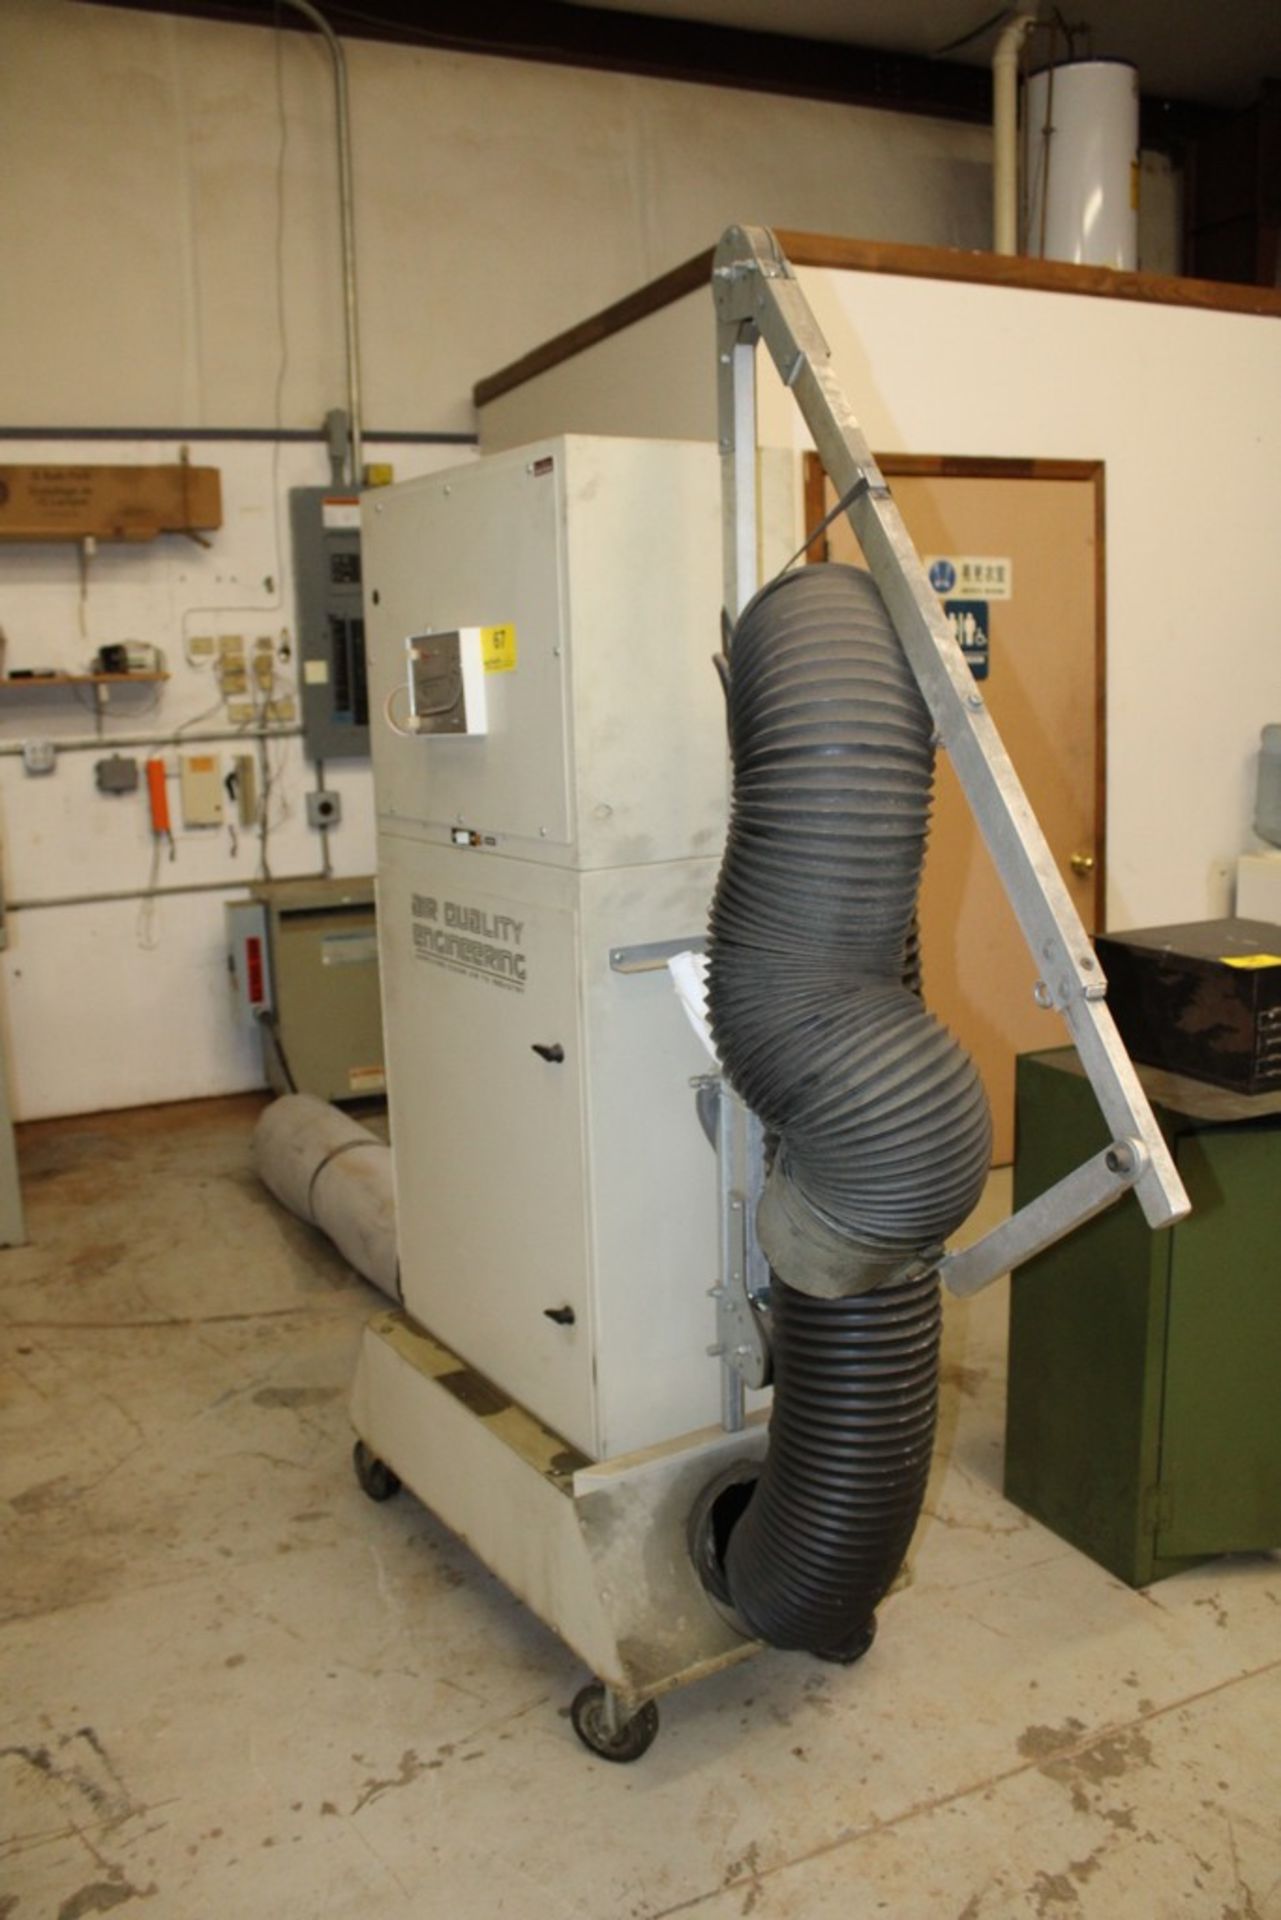 AIR QUALITY ENGINEERING FUME EXTRACTOR WITH DWYER MARK II MODEL 26 MANOMETER - Image 3 of 3